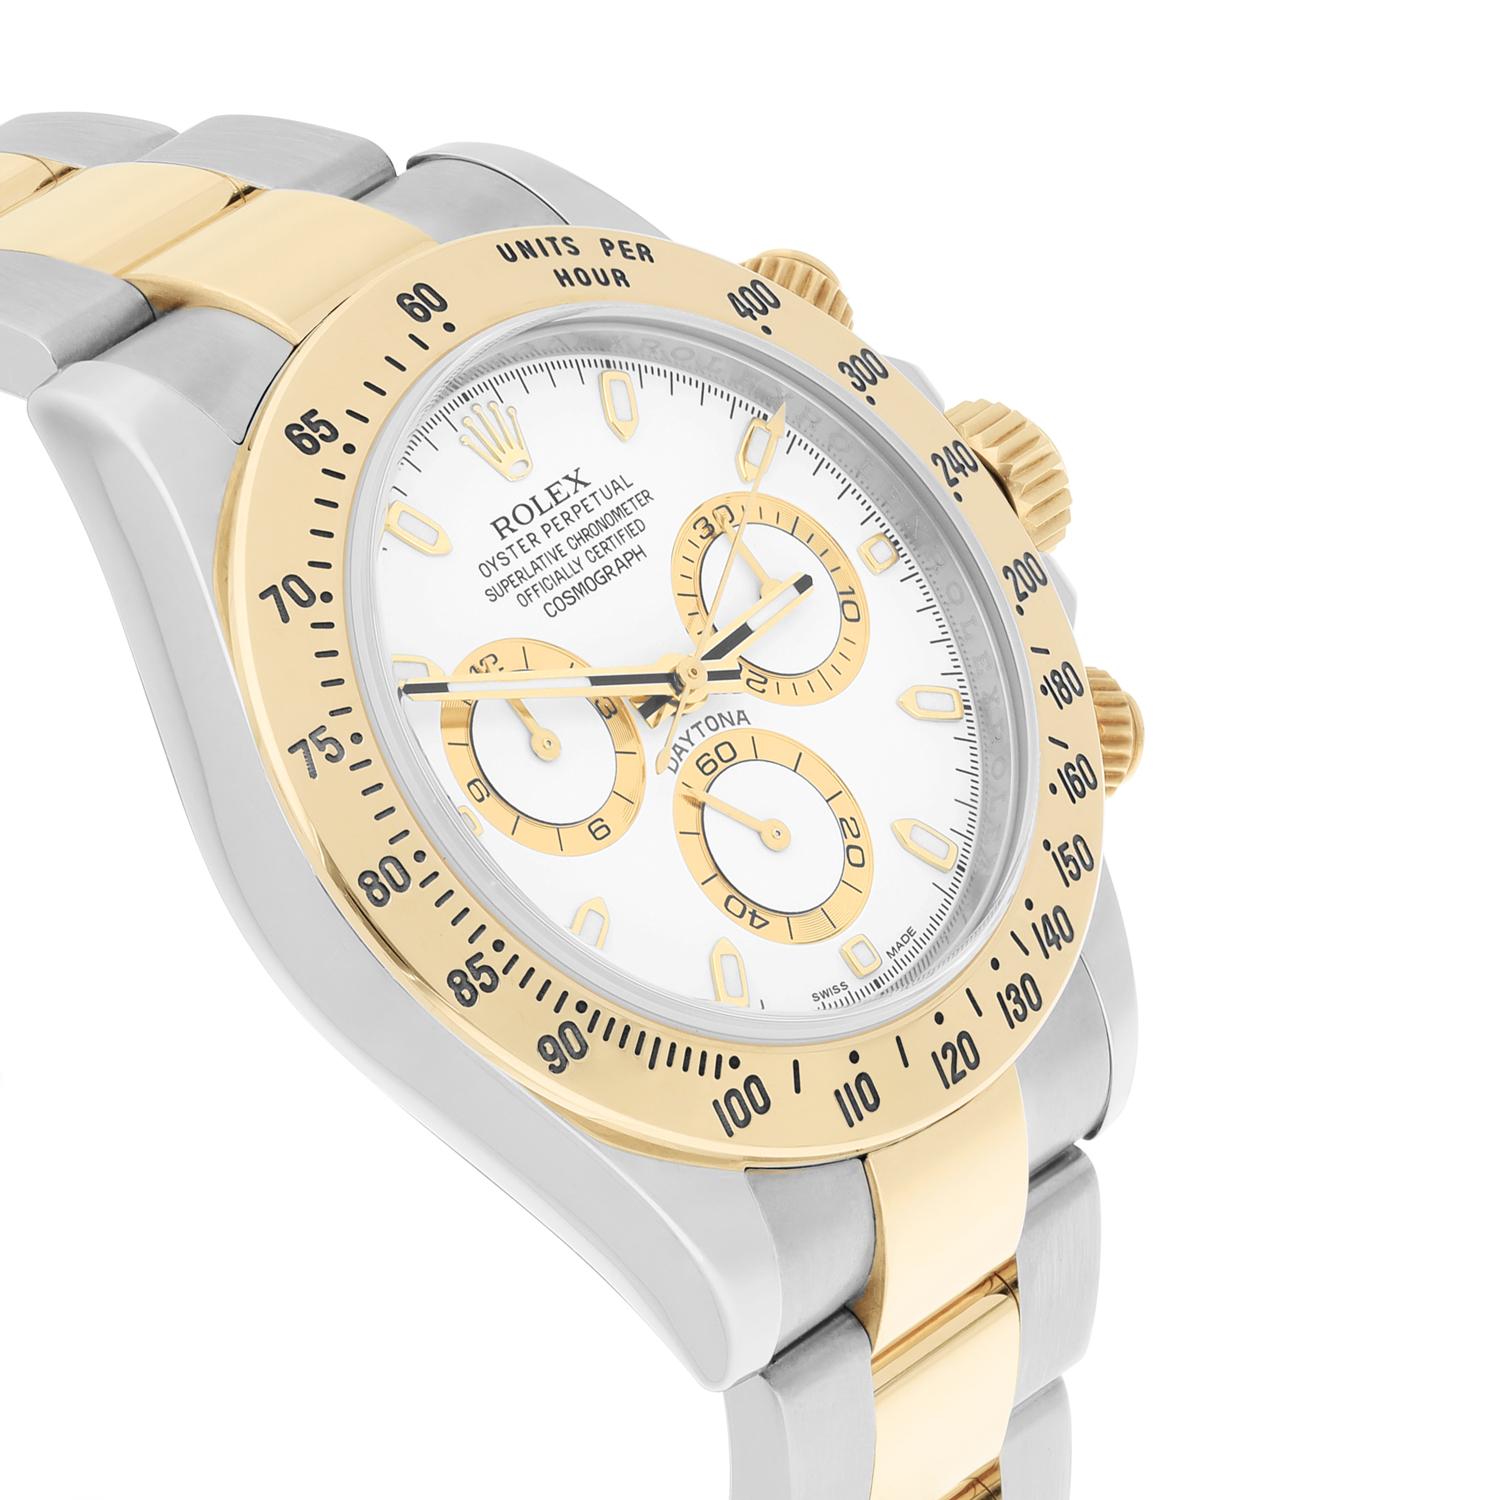 Men's Rolex Daytona Stainless Steel Yellow Gold White Dial Mens Watch 116523 Complete For Sale